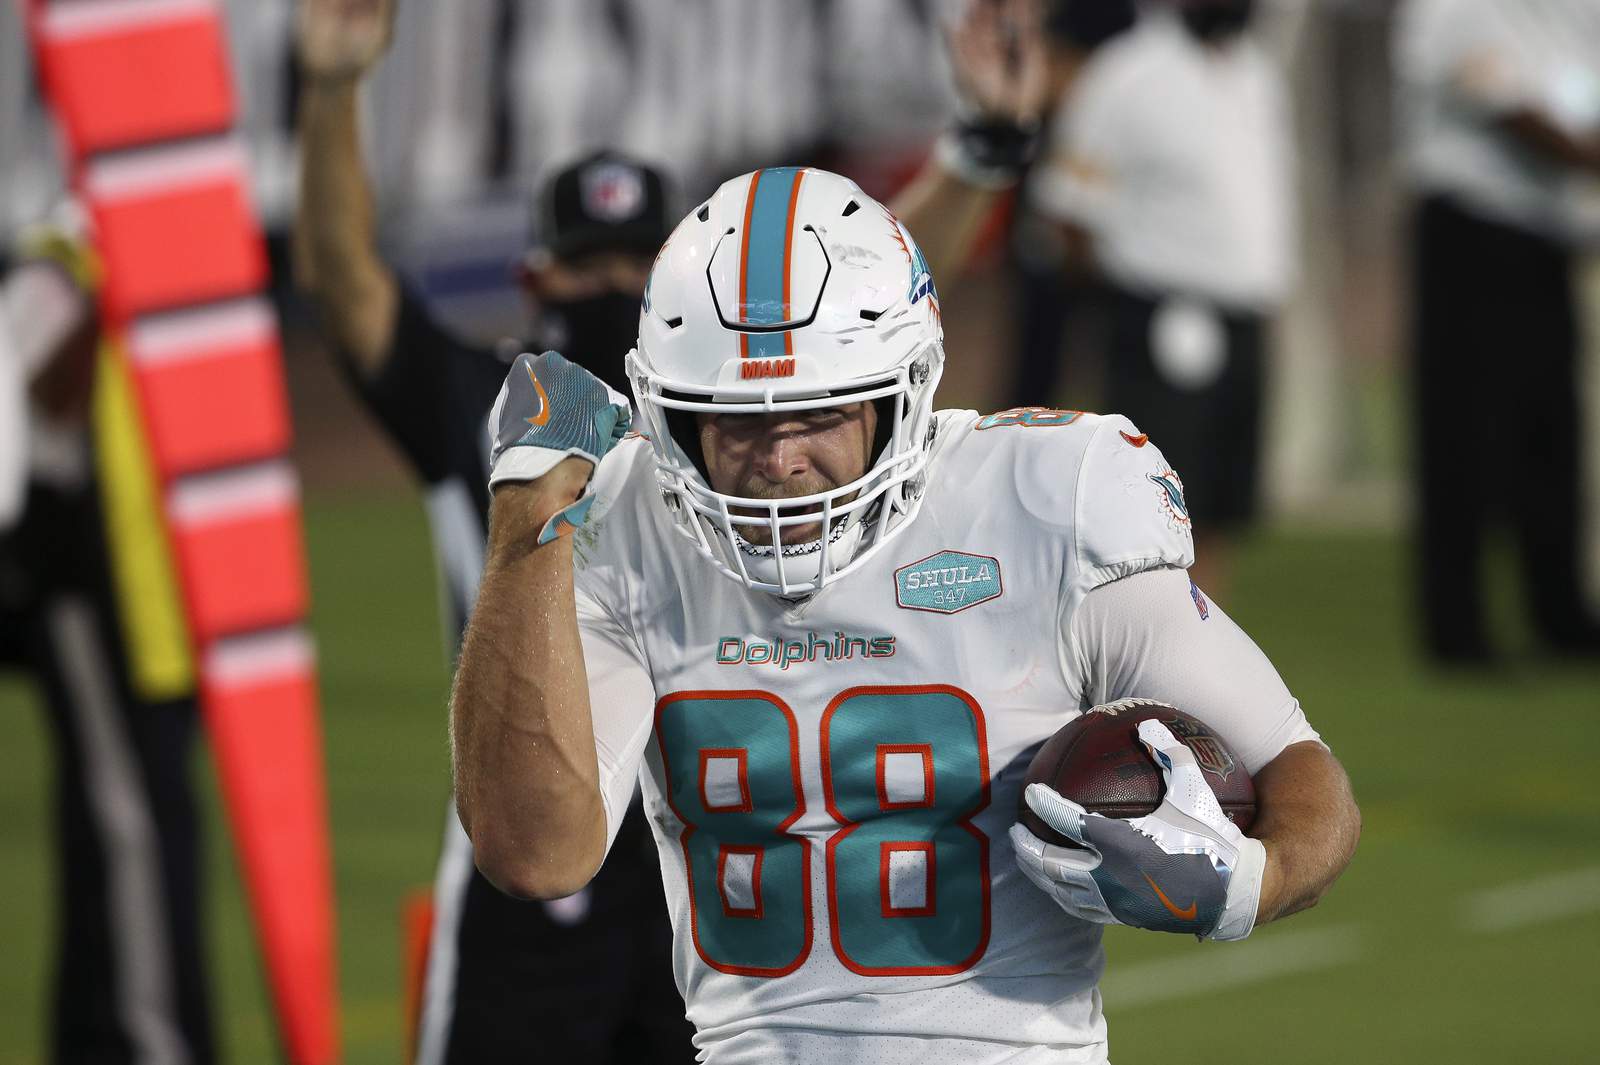 Dolphins head coach Brian Flores says too early to tell about Mike Gesicki injury